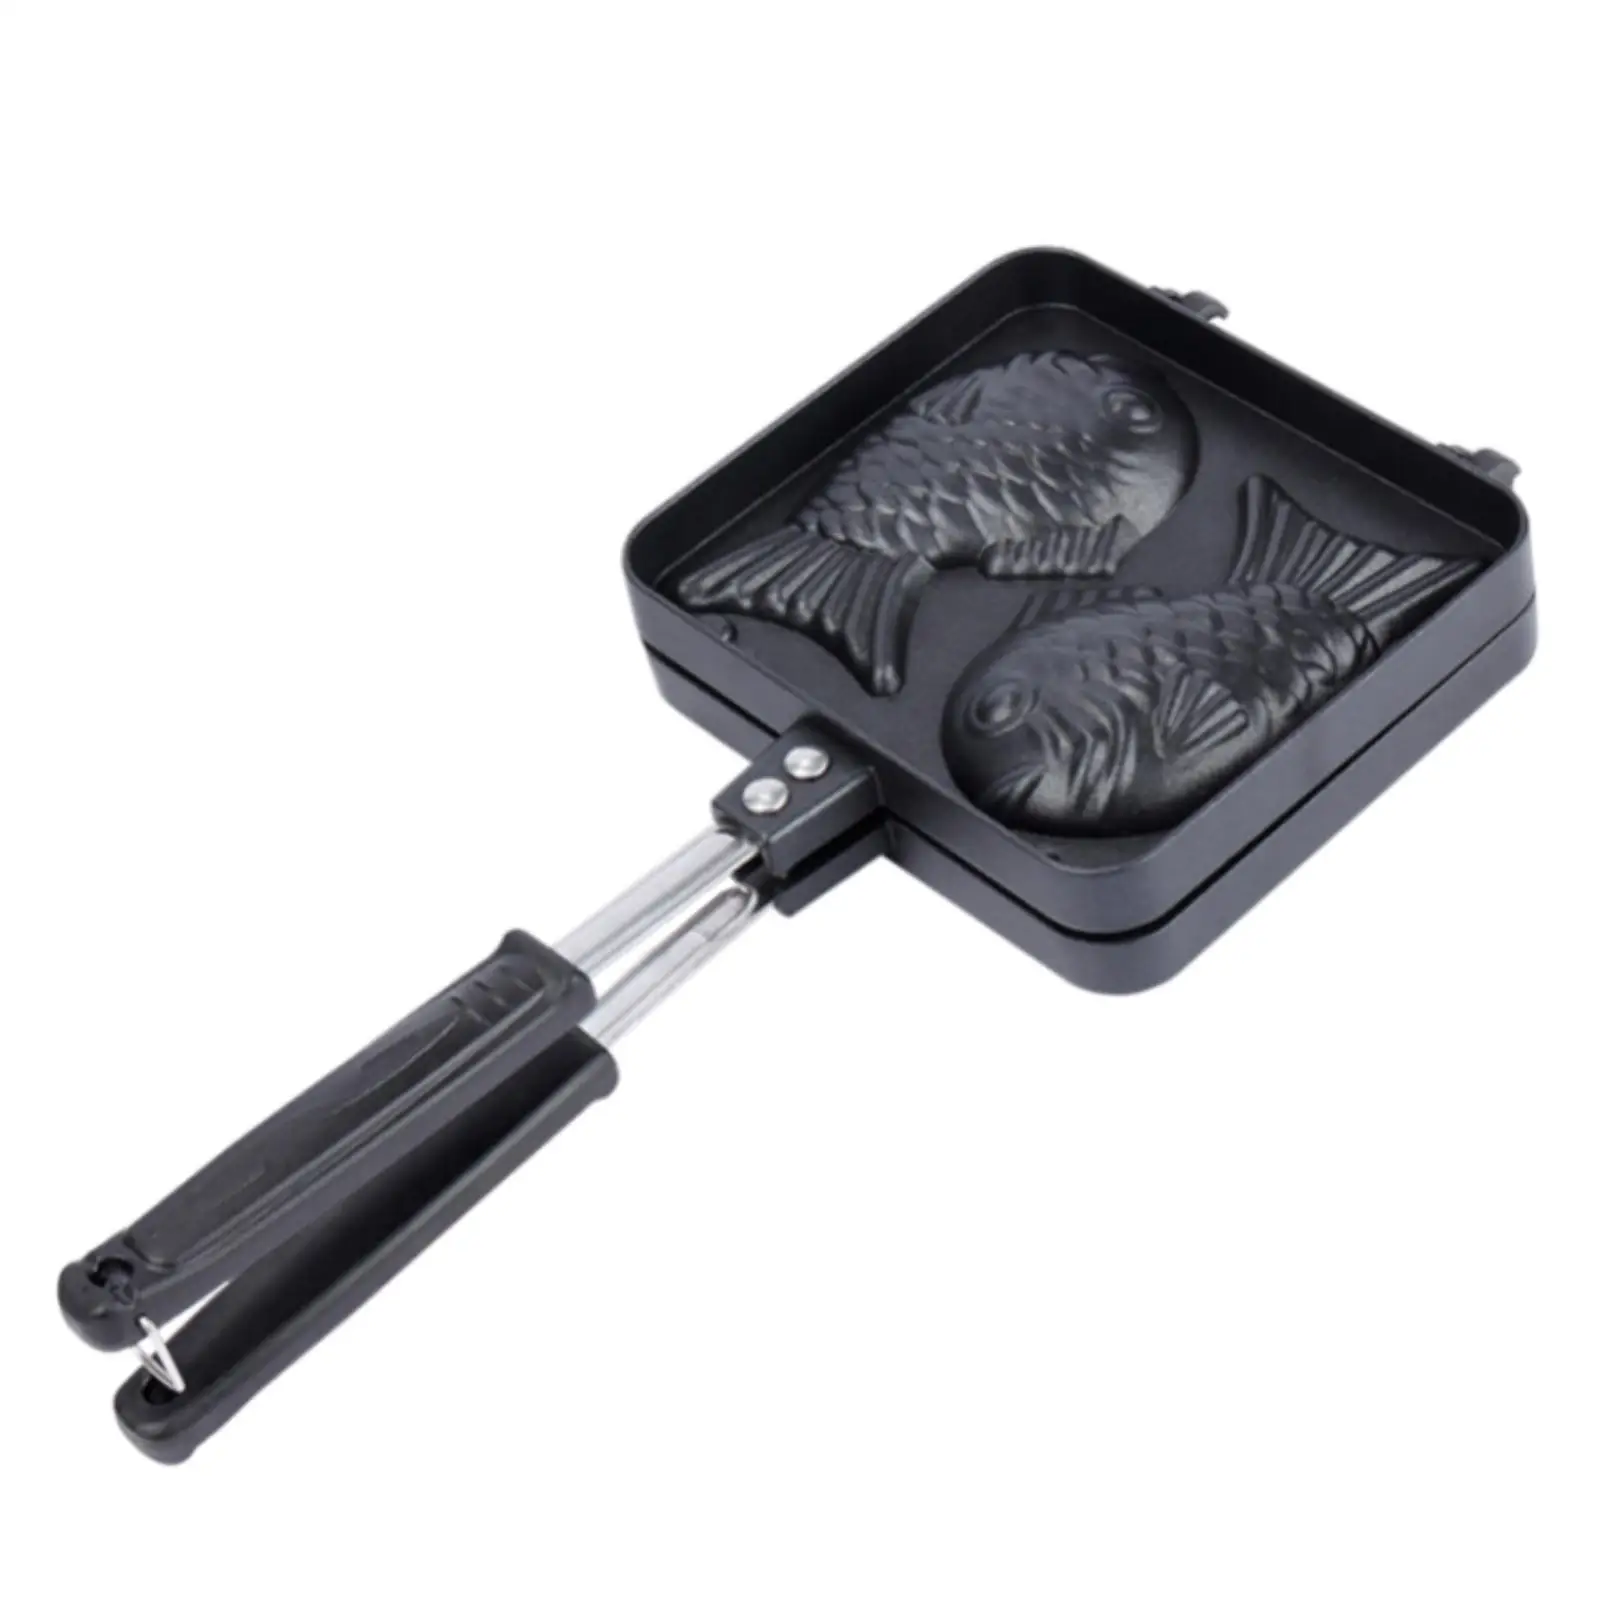 Japanese Style Waffle Maker Practical Kitchengadget Aluminum Durable Nonstick Snapper Grilling Dish